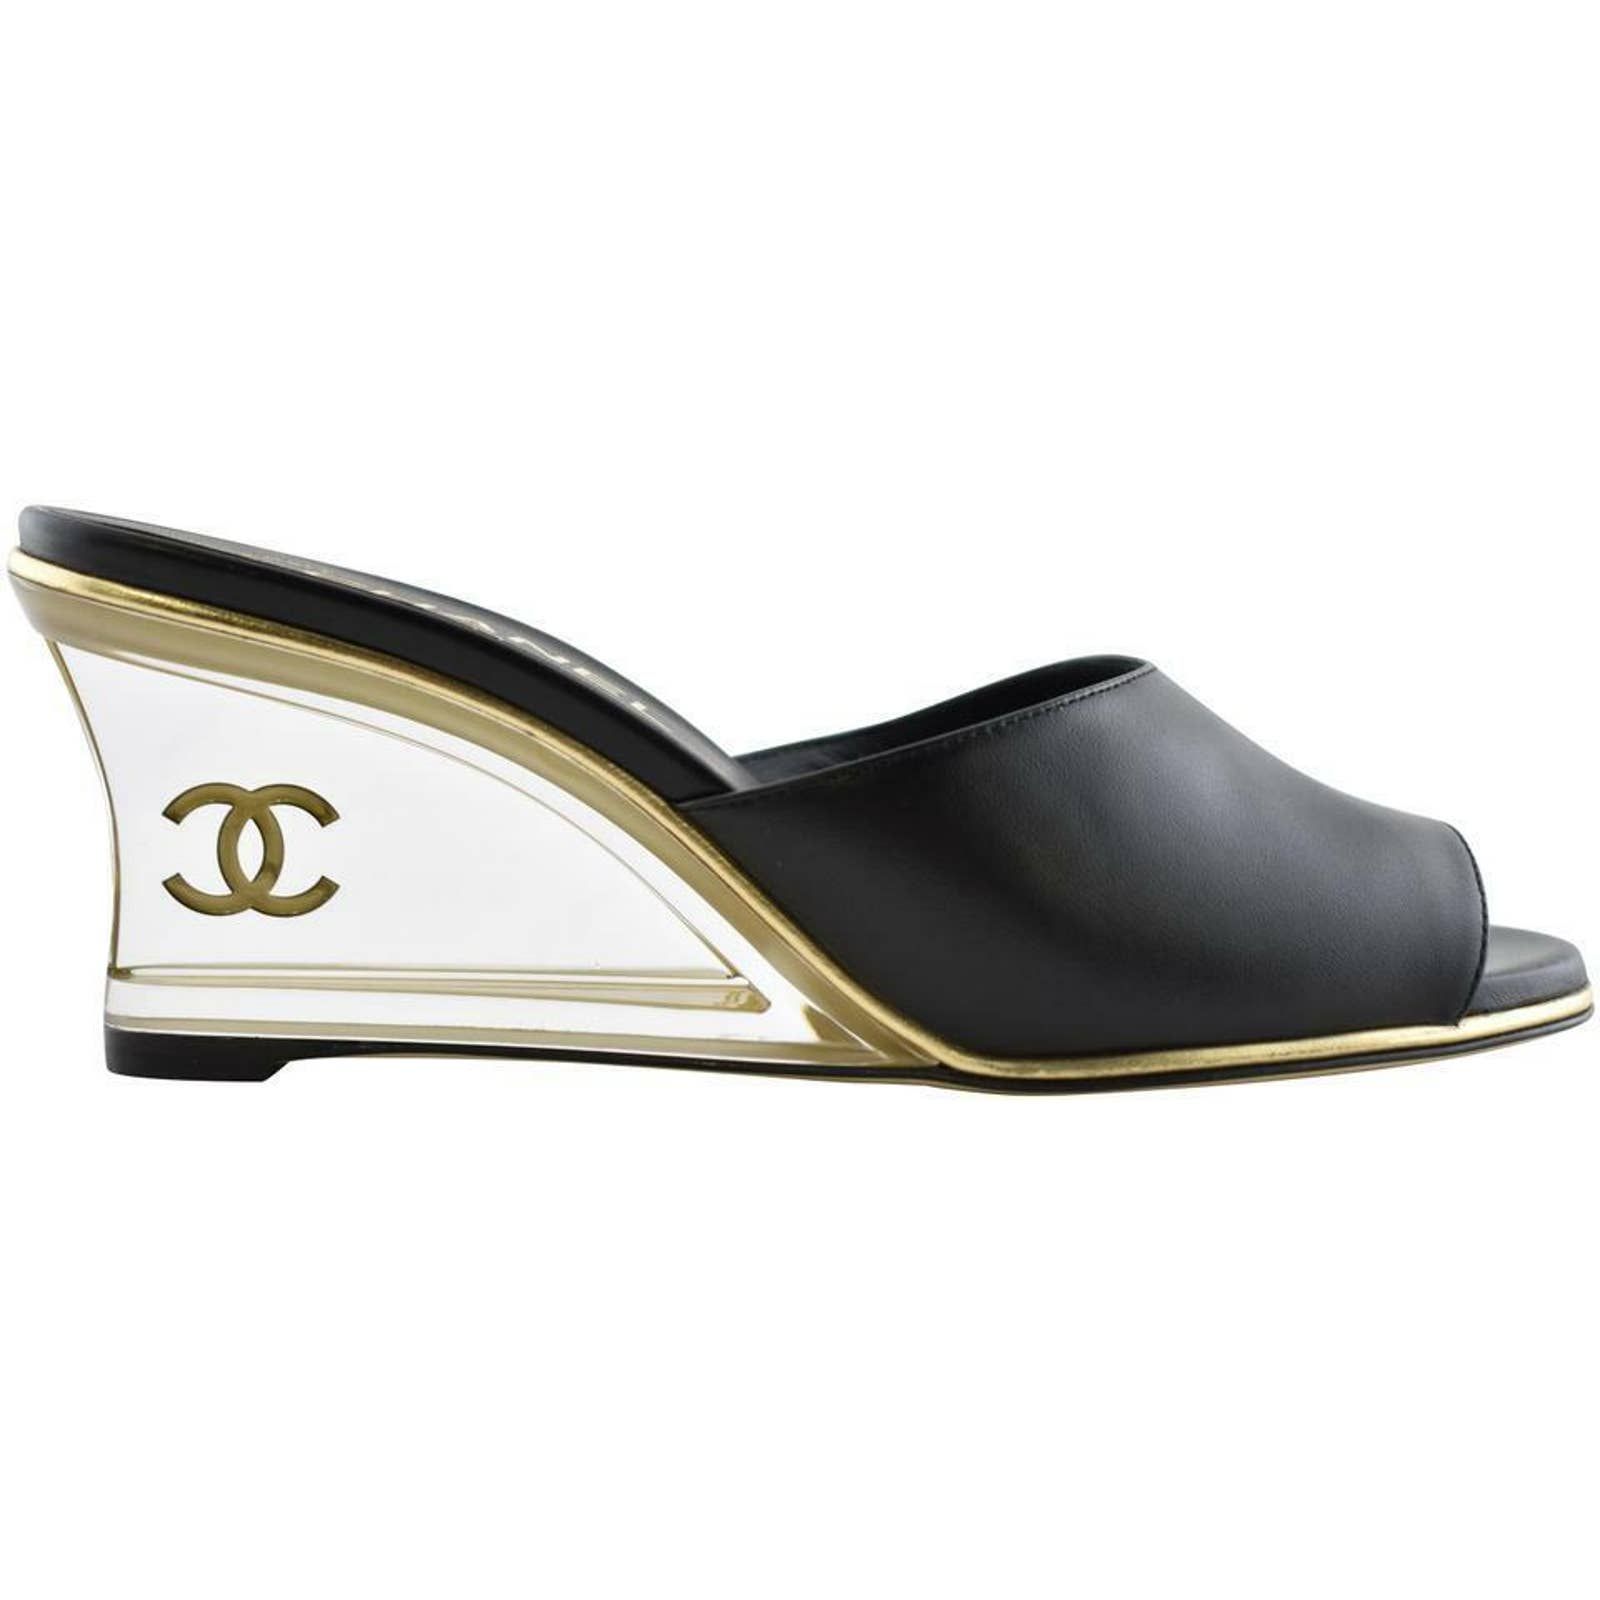 CHANEL PATENT LEATHER WITH CLEAR TRANSPARENT AND GOLD TRIM WEDGE SANDALS  35.5